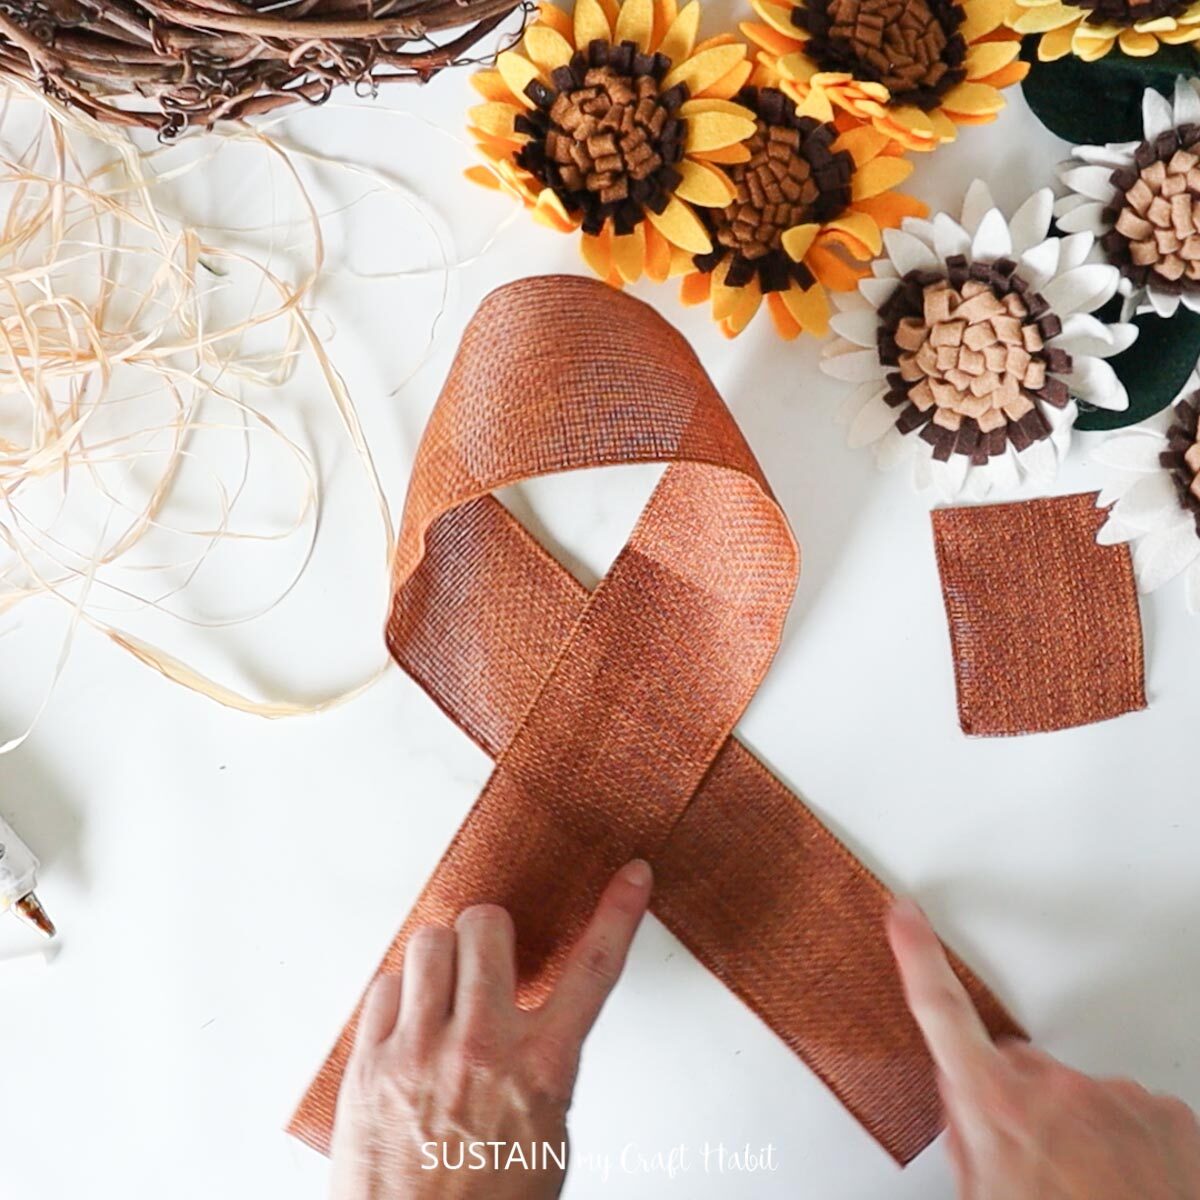 Folding the brown burlap ribbon to make a bow.